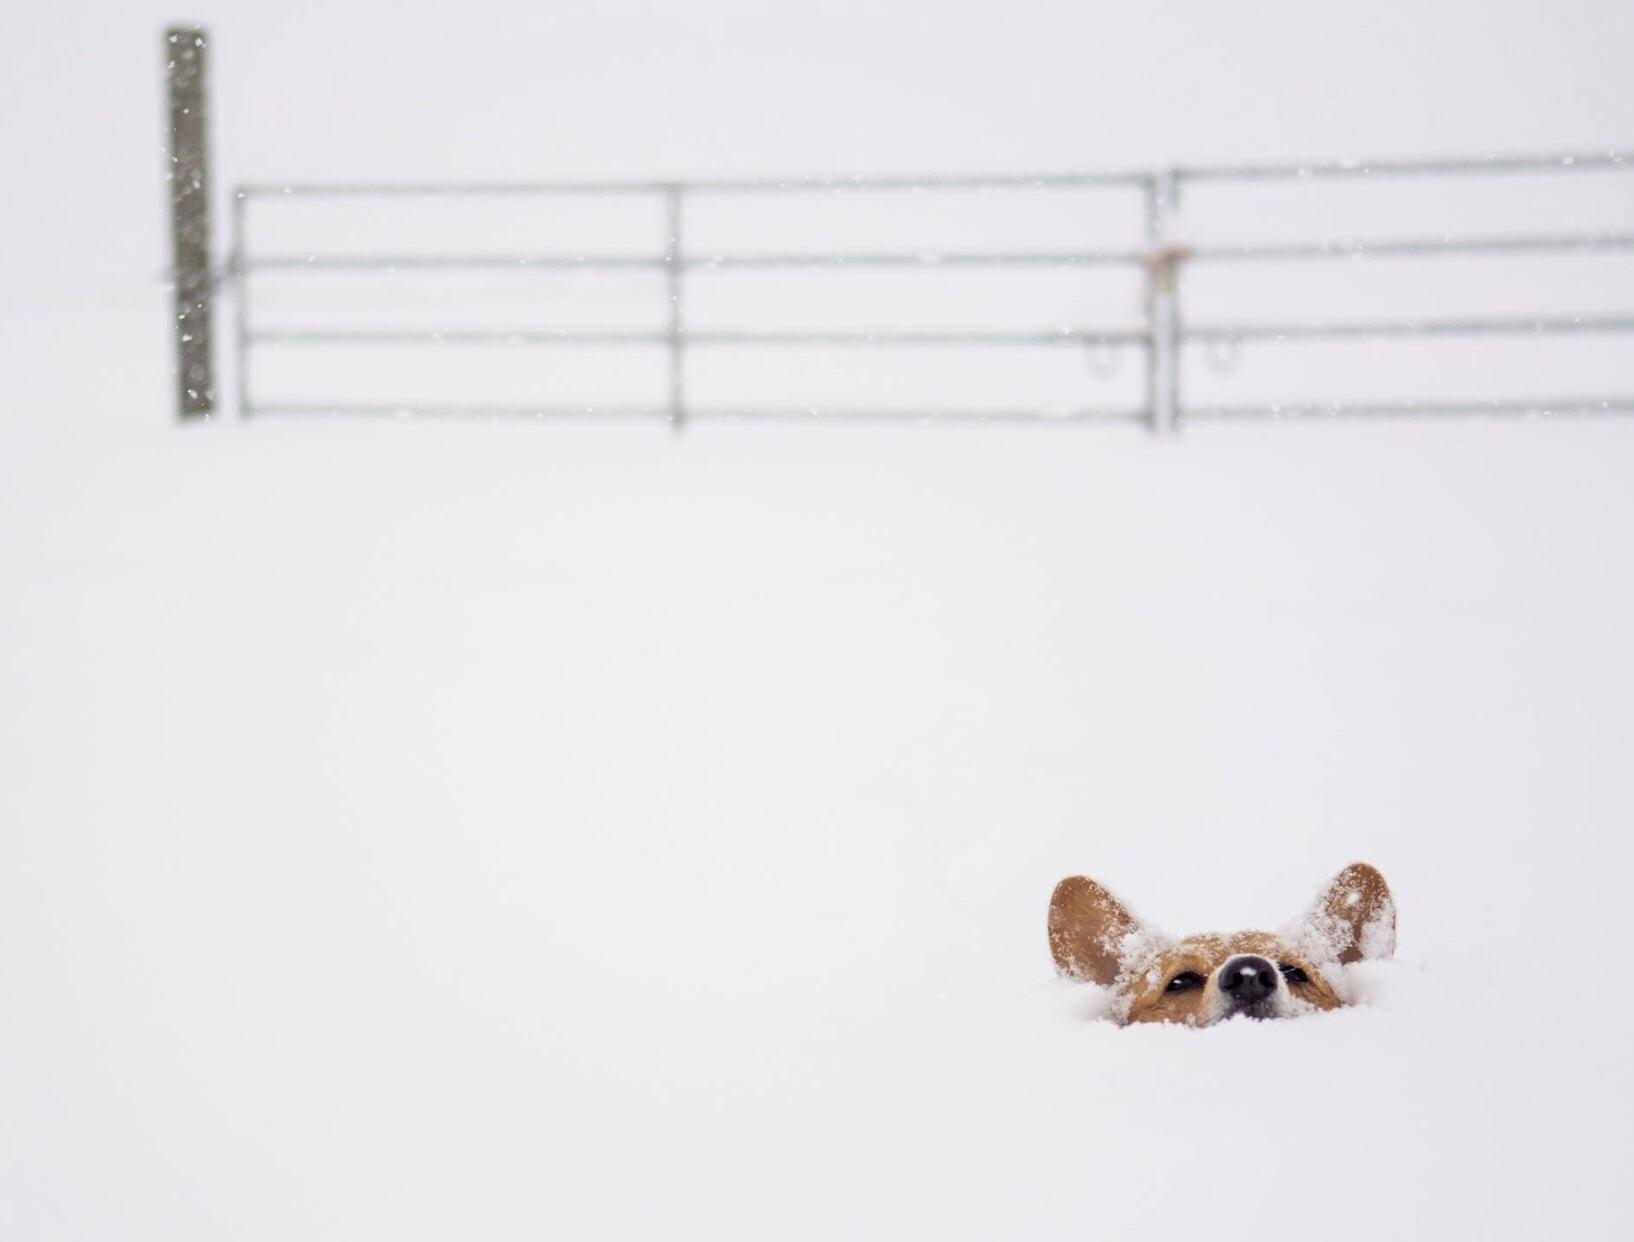 Corgi+kindly+requests+that+the+snow+goes+away.